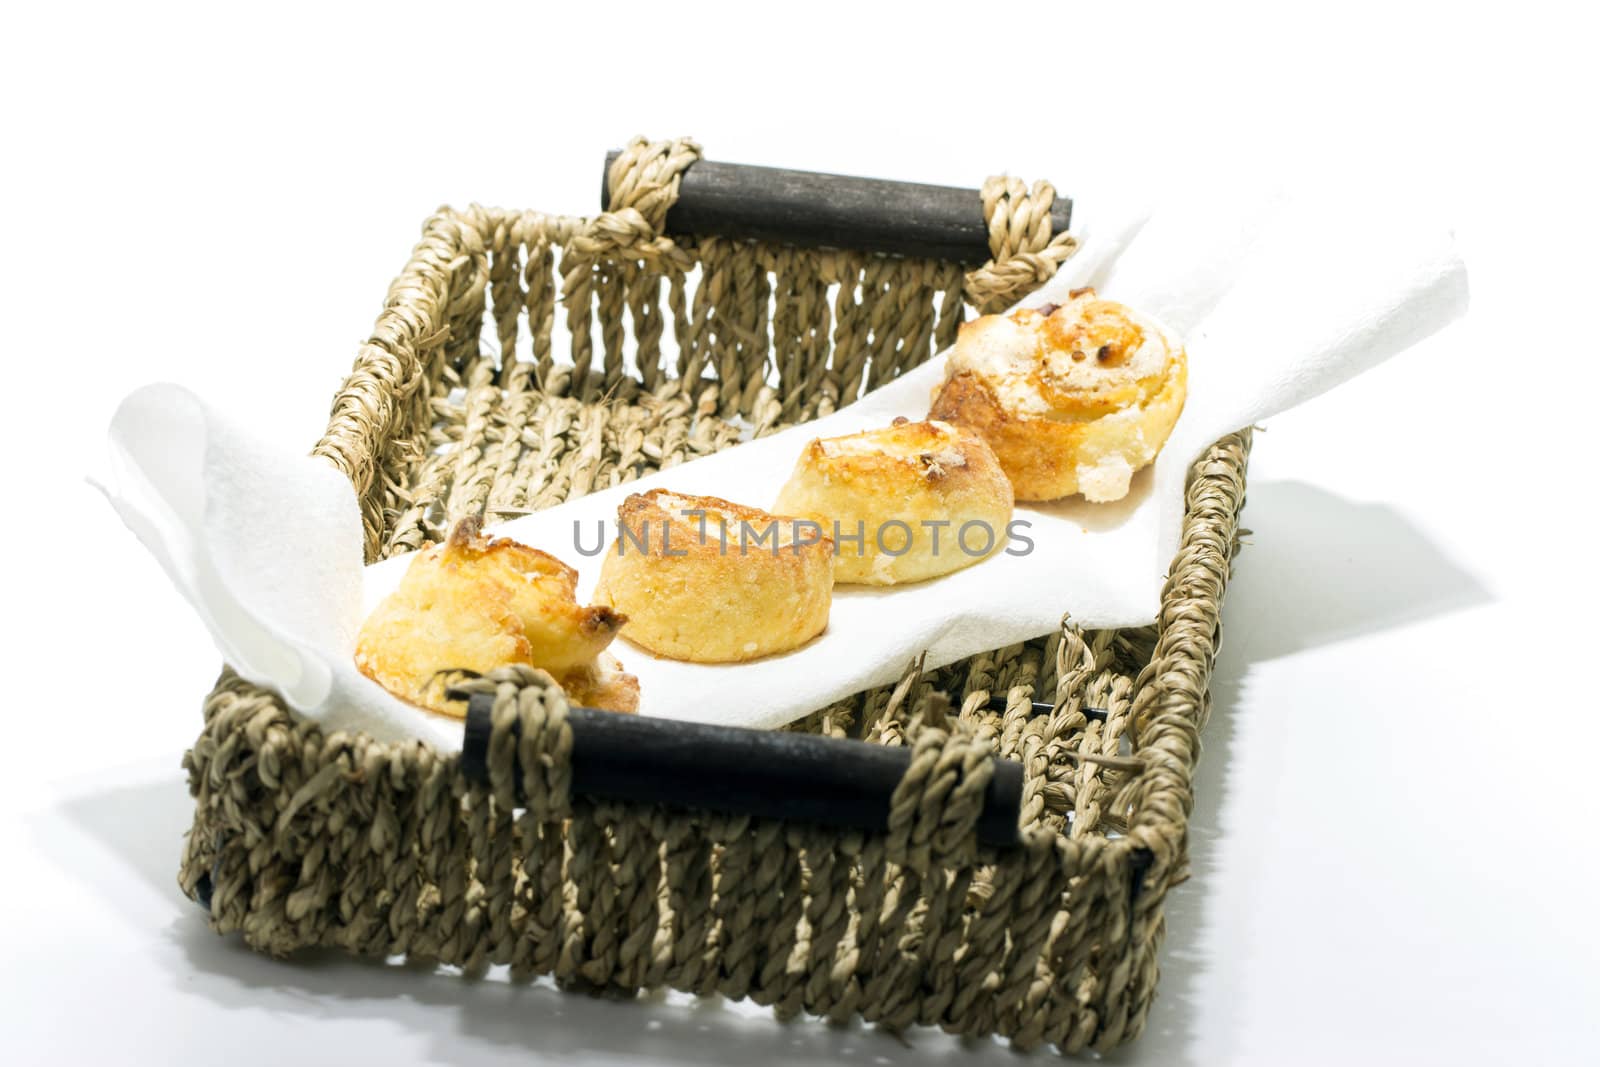 Homemade Cookies in a basket on a white background